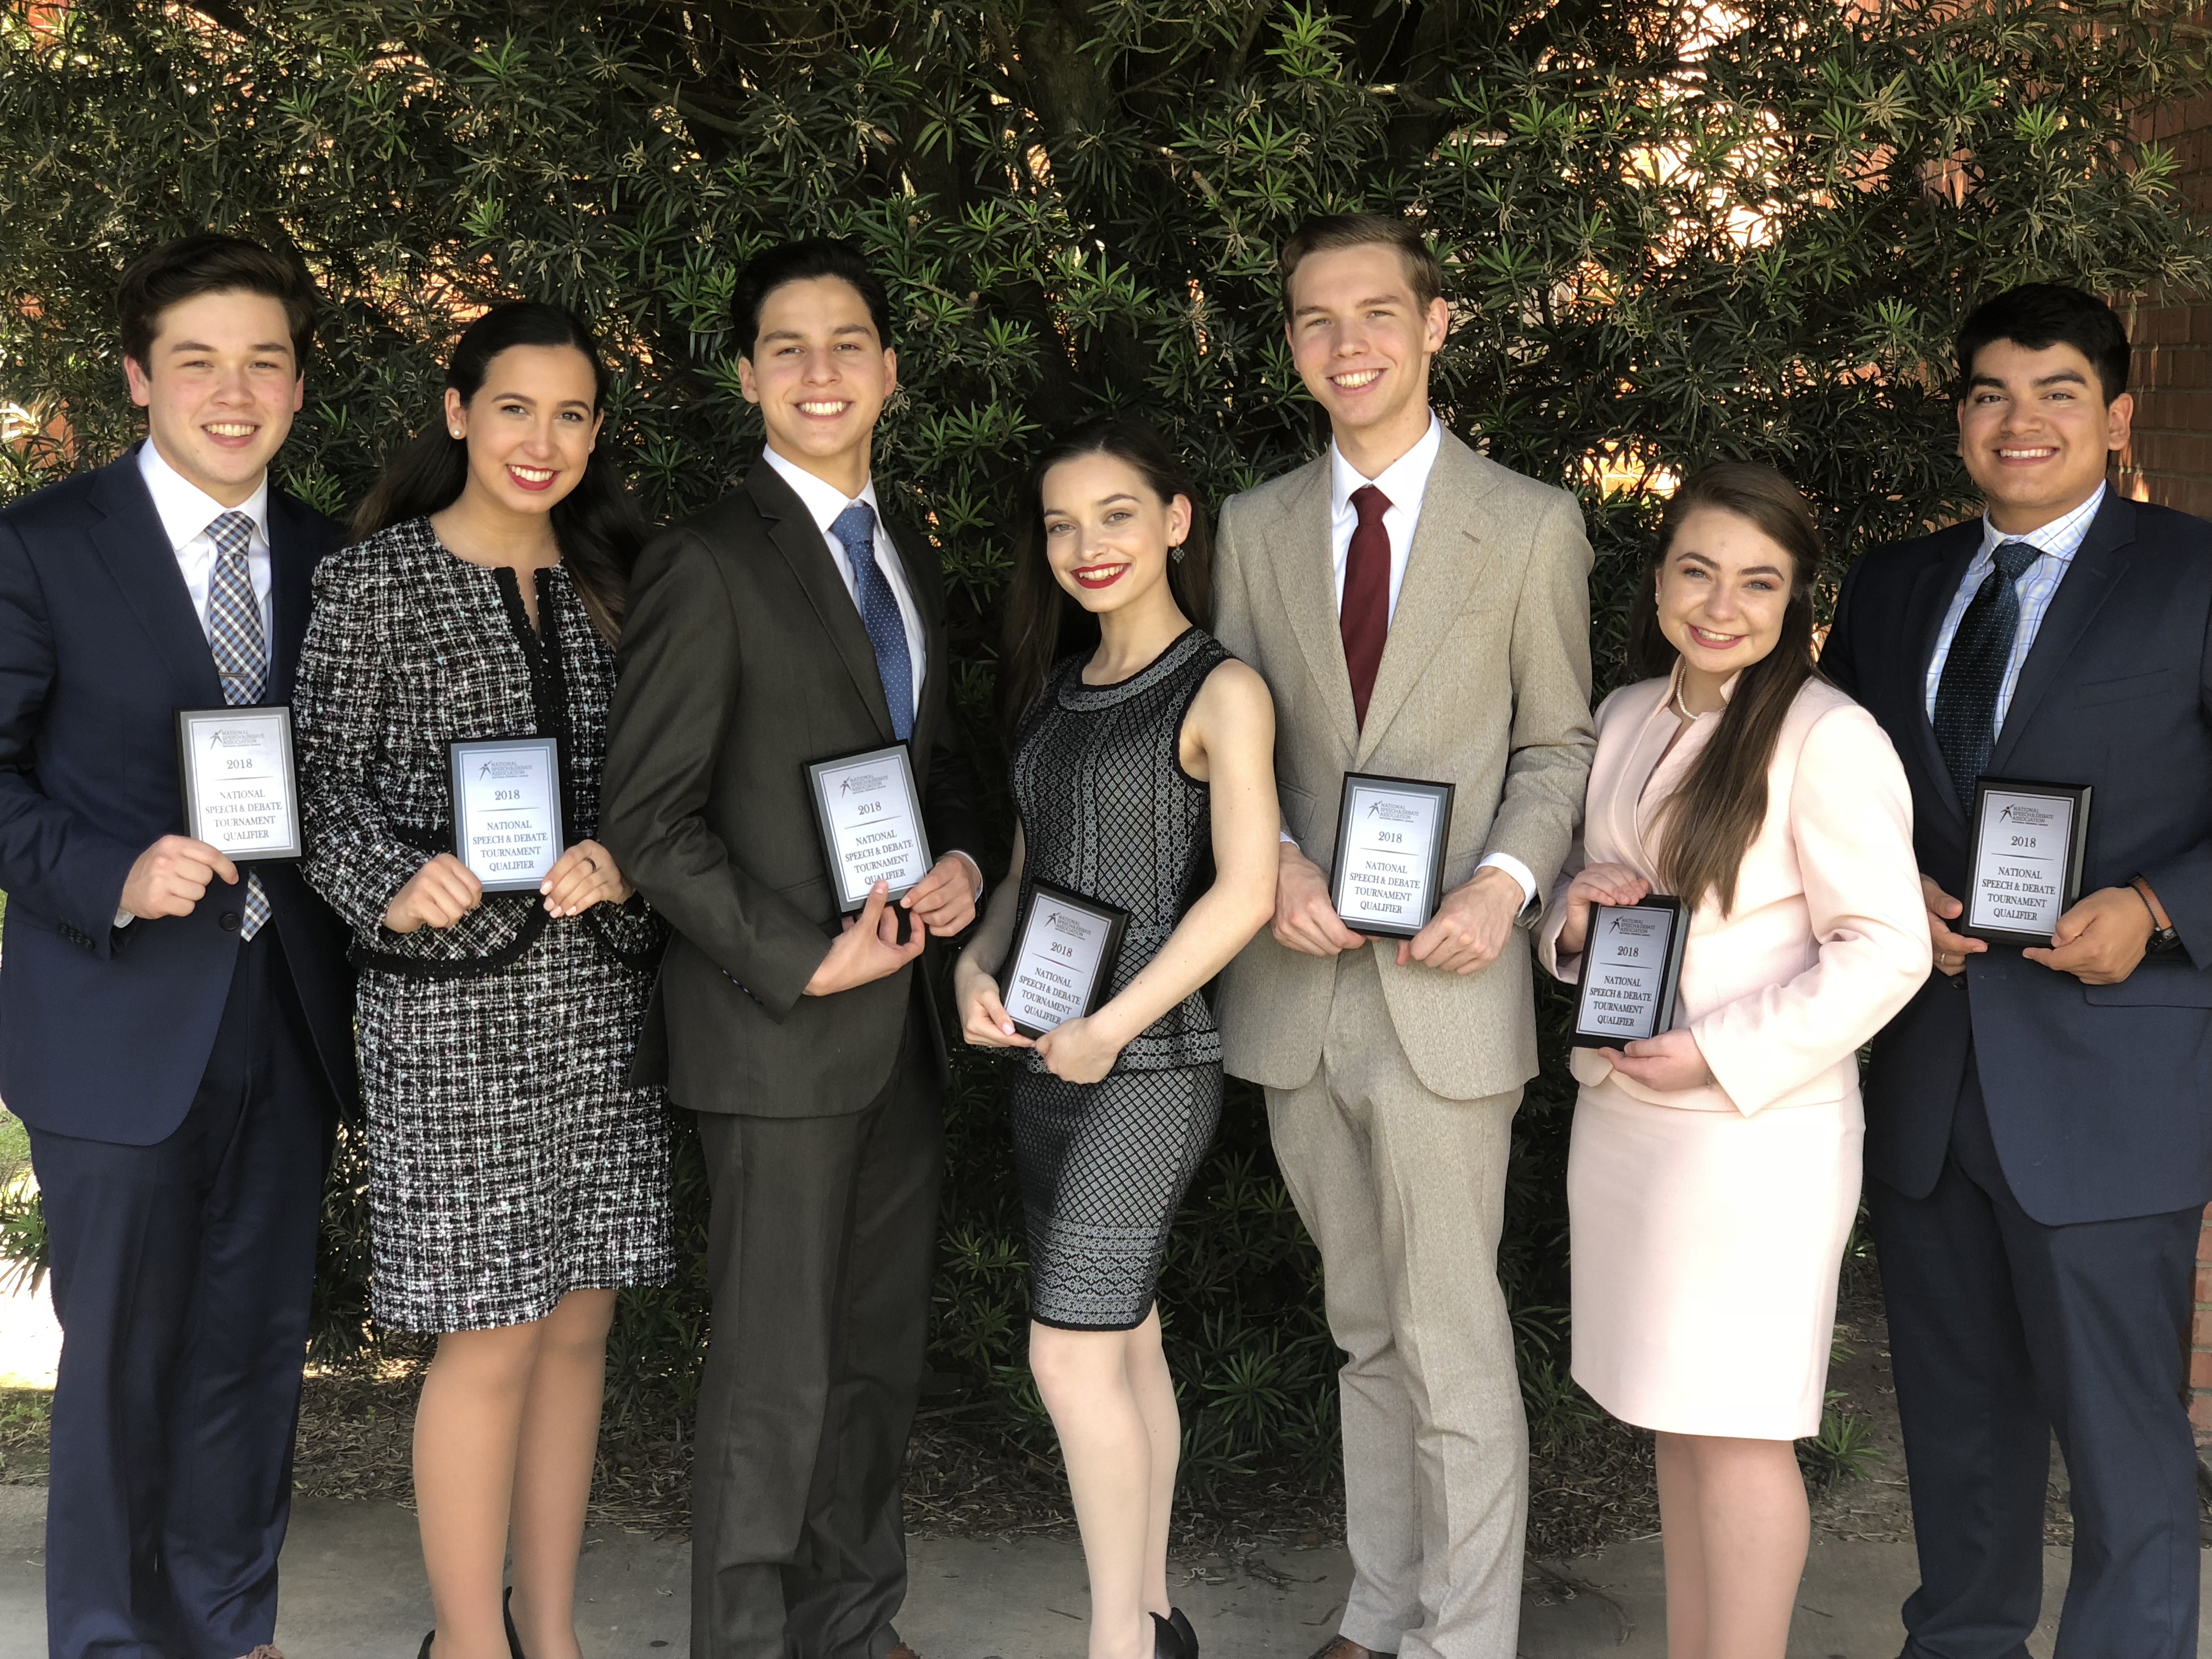 South Speech and Debate competitors advance to national tournament